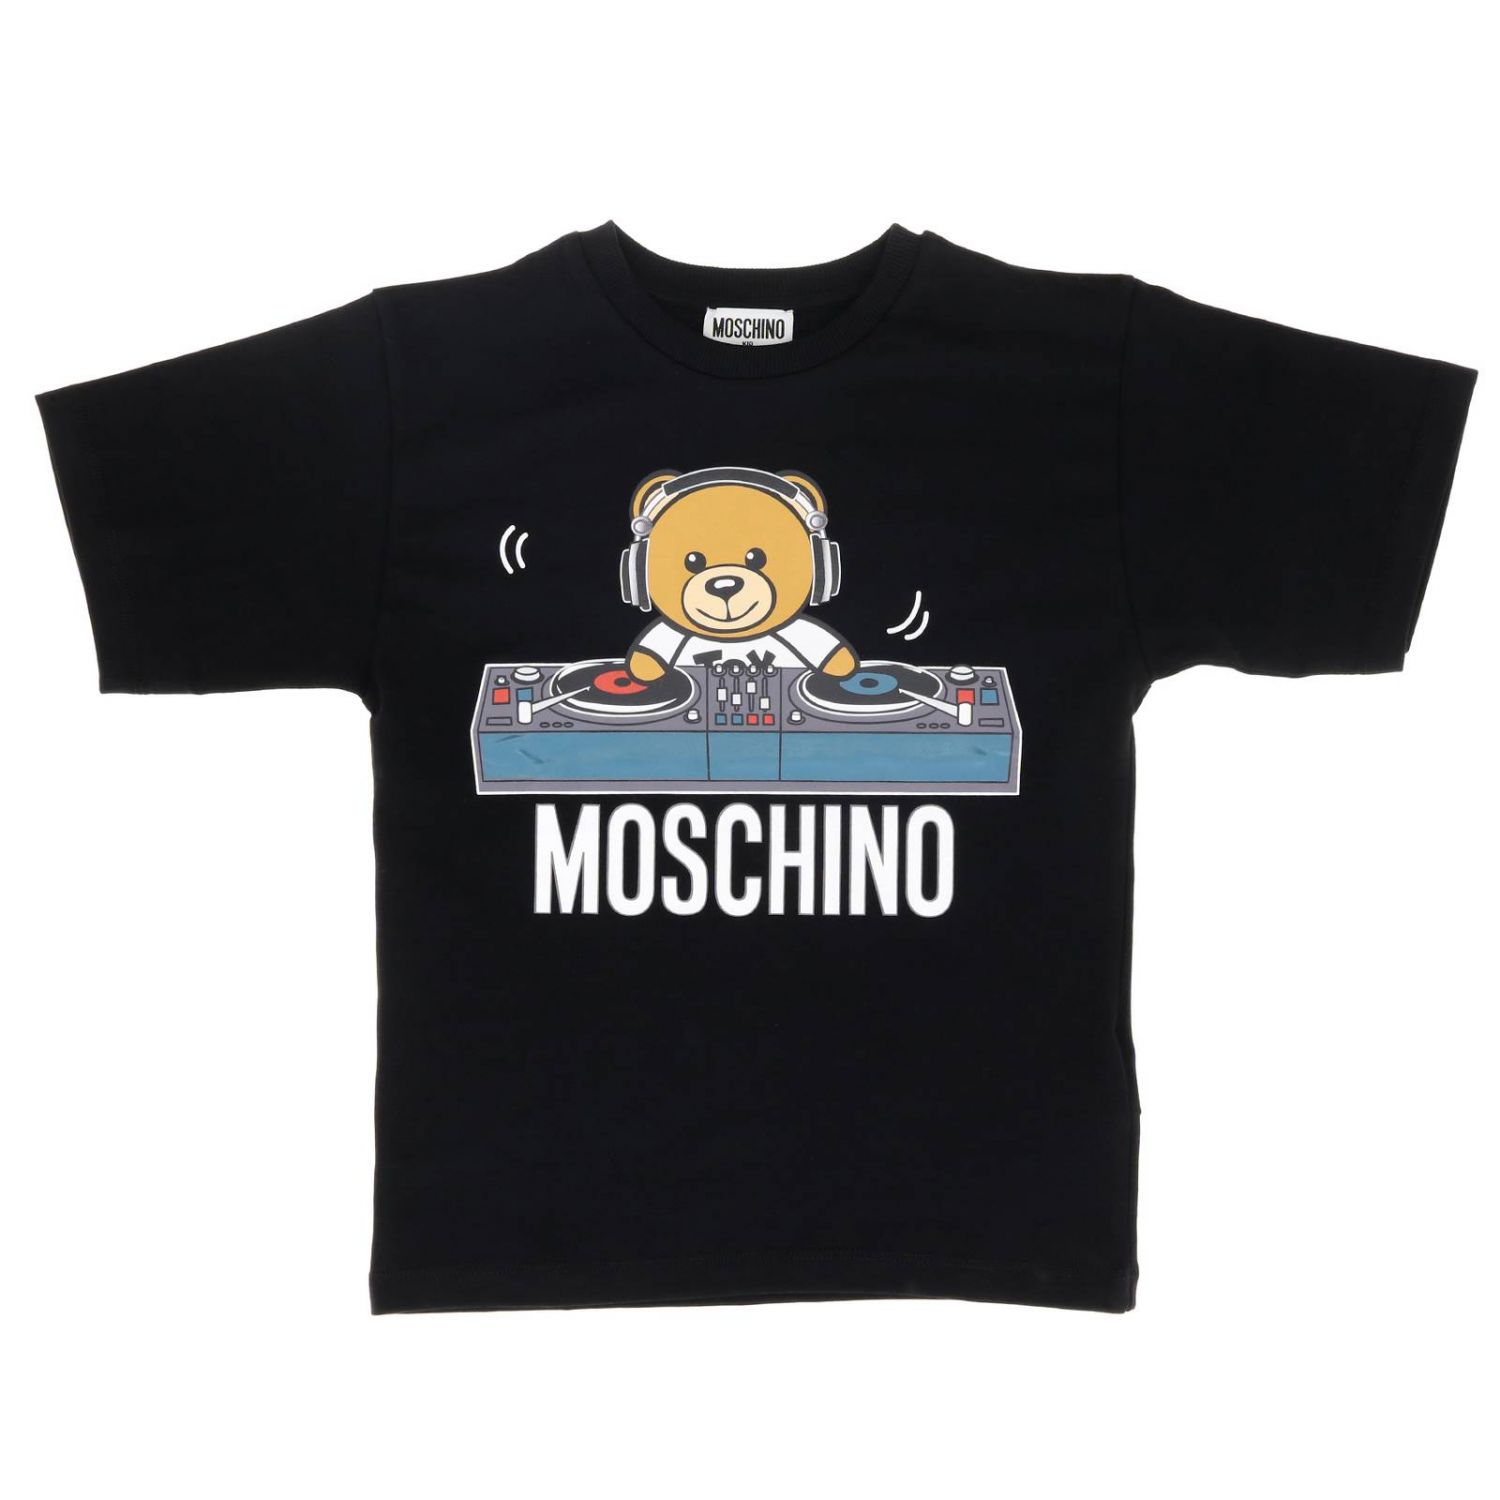 Moschino Kid Outlet: t-shirt for boy - Black | Moschino Kid t-shirt ...